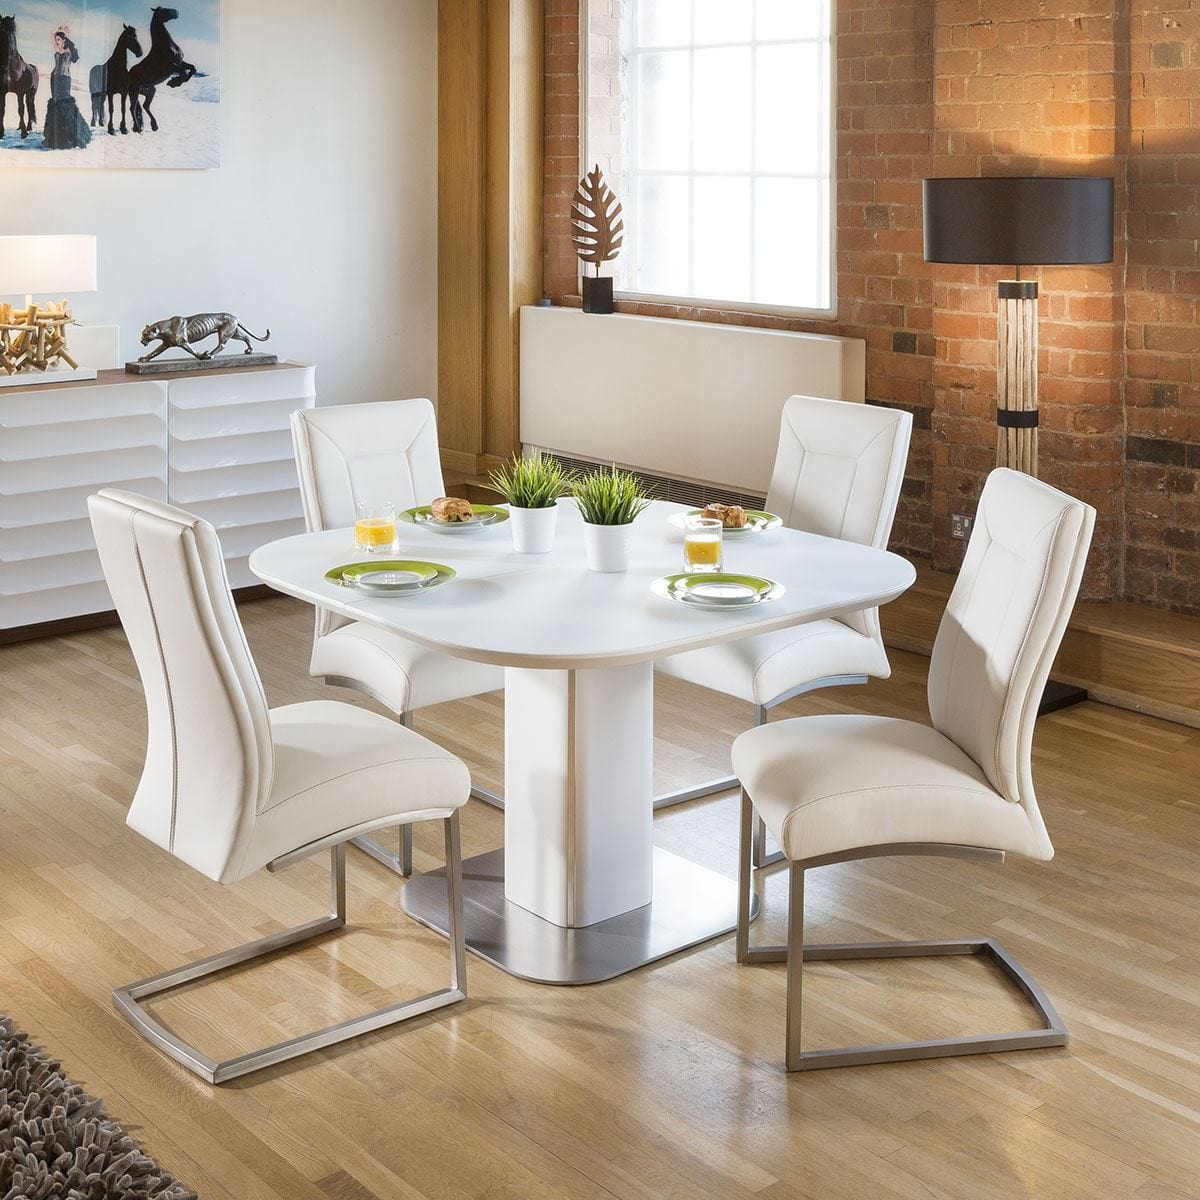 Quatropi Stunning Dining Set White Glass Square Extending Table +4 Chairs 4110